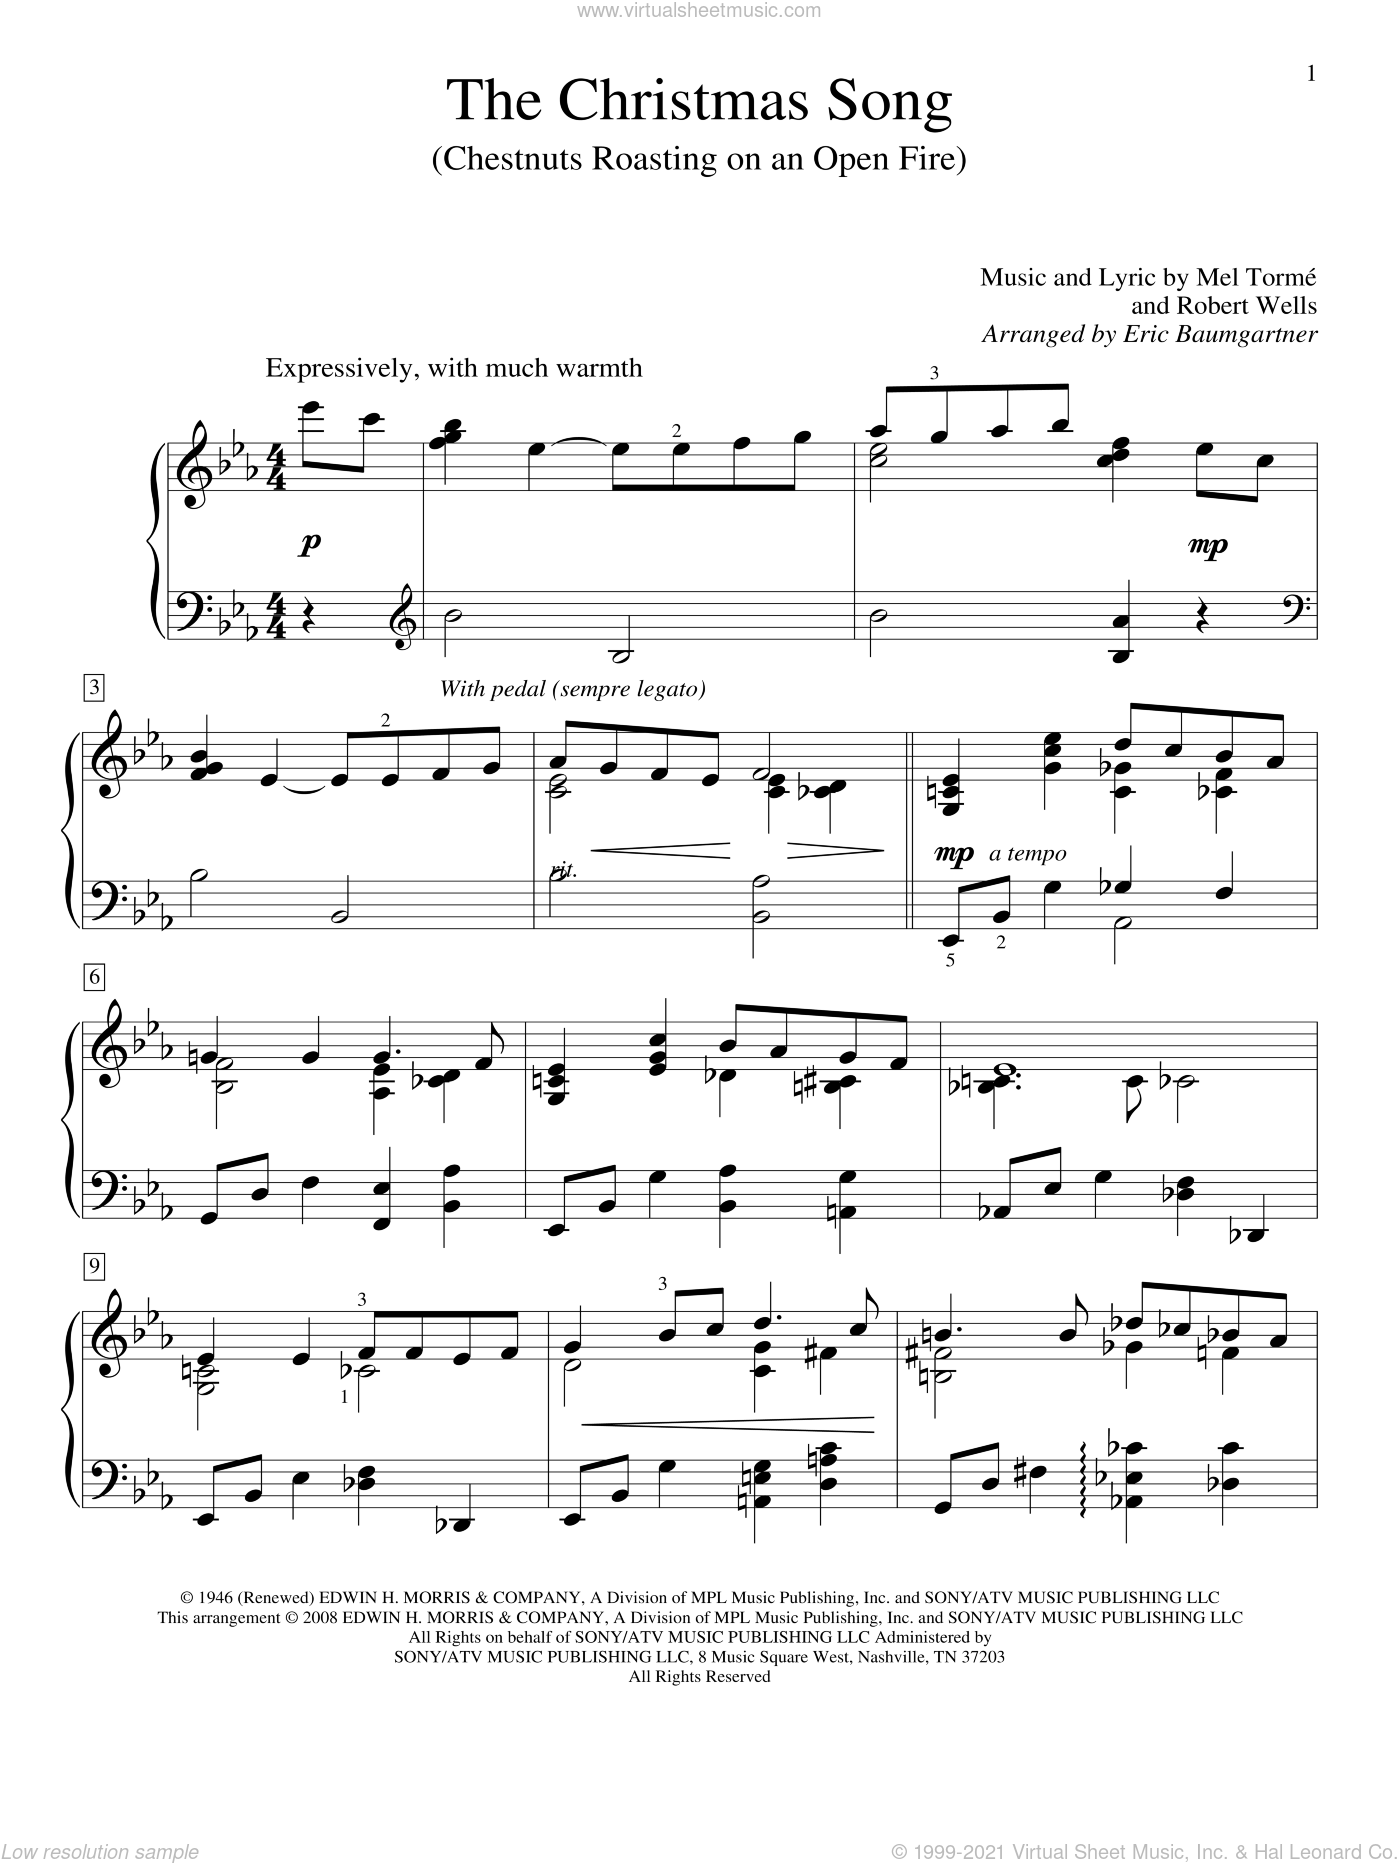 Torme - The Christmas Song (Chestnuts Roasting On An Open Fire) sheet ...